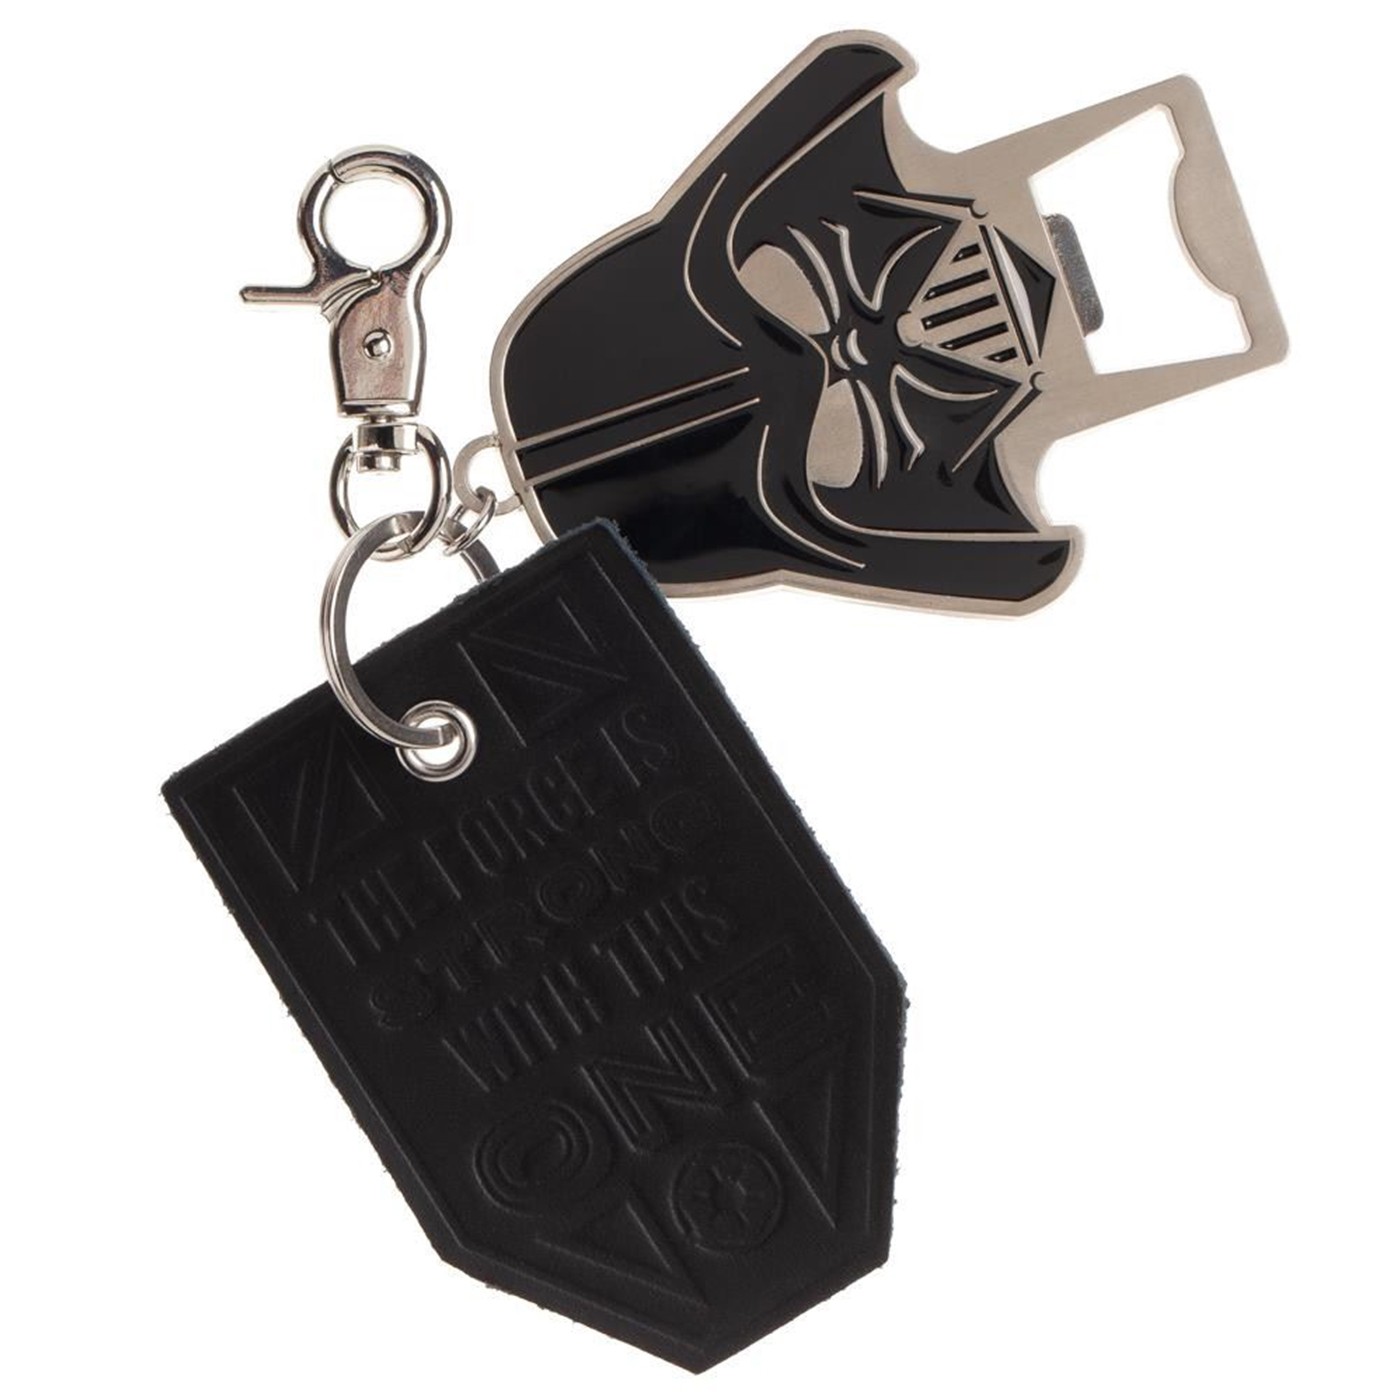 Darth Vader Premium  Bottle Opener and Leather Key Ring